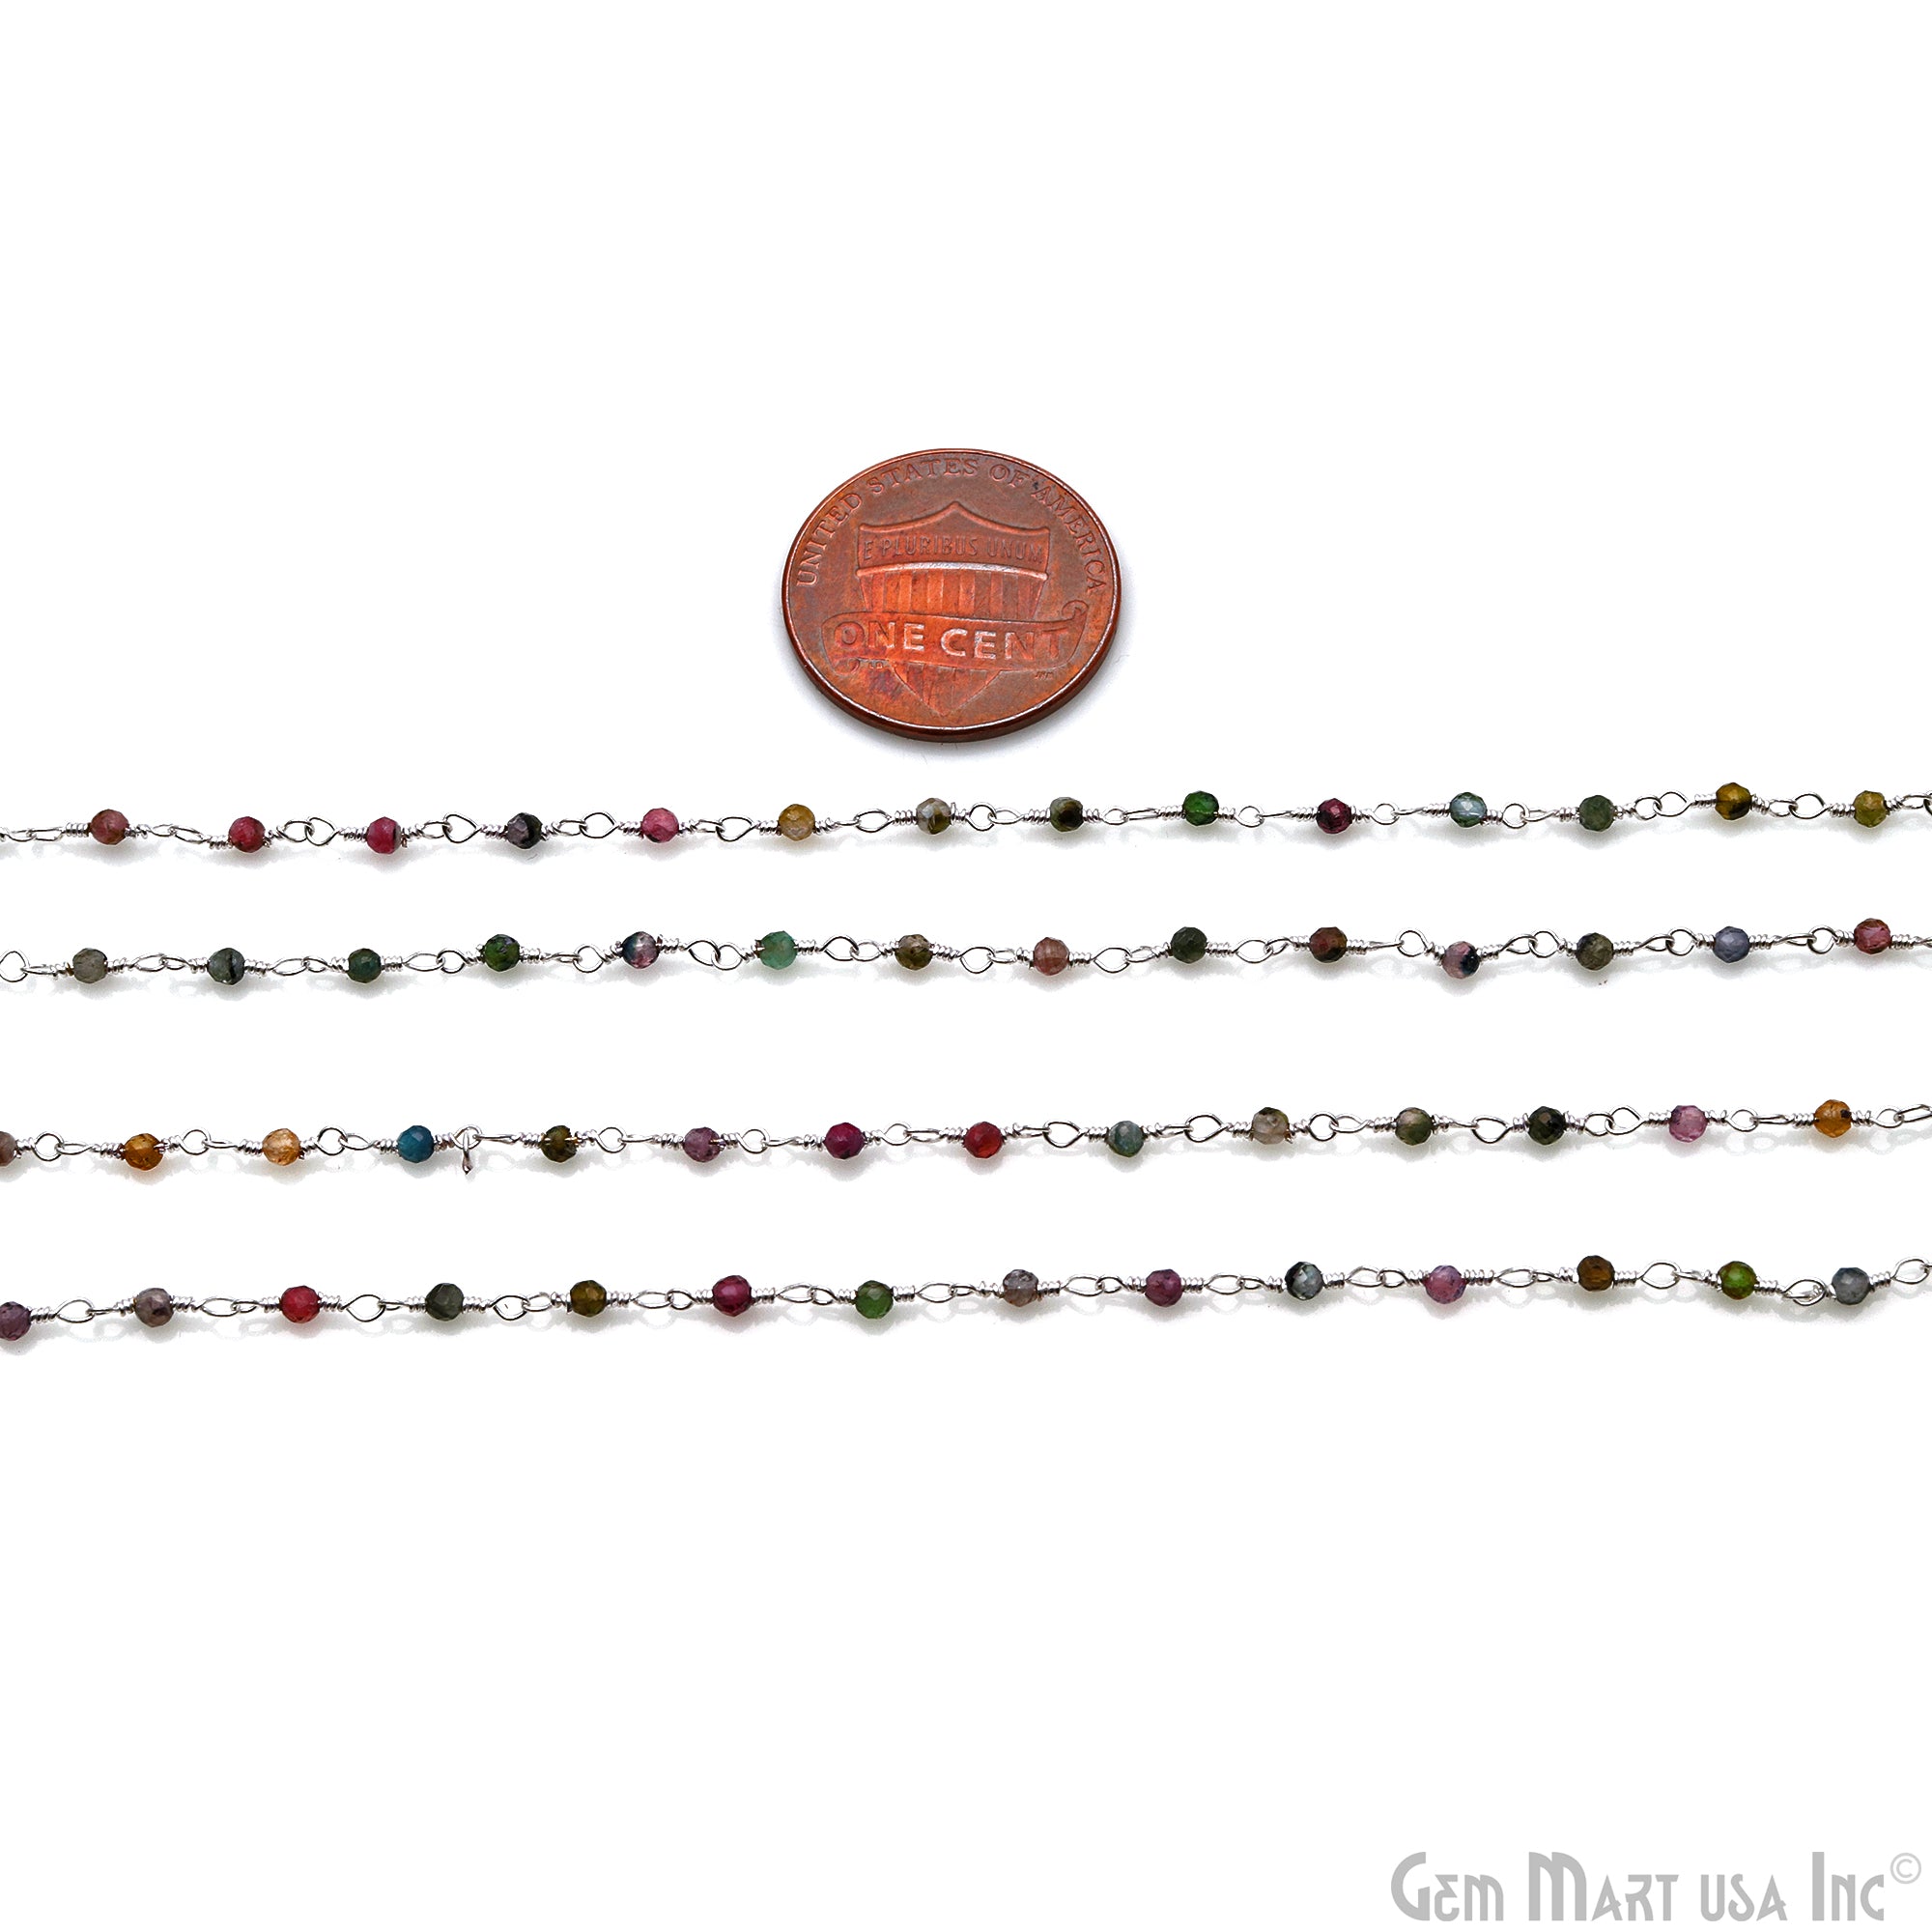 Multi Tourmaline 1-1.5mm Round Tiny Beads Silver Plated Rosary Chain